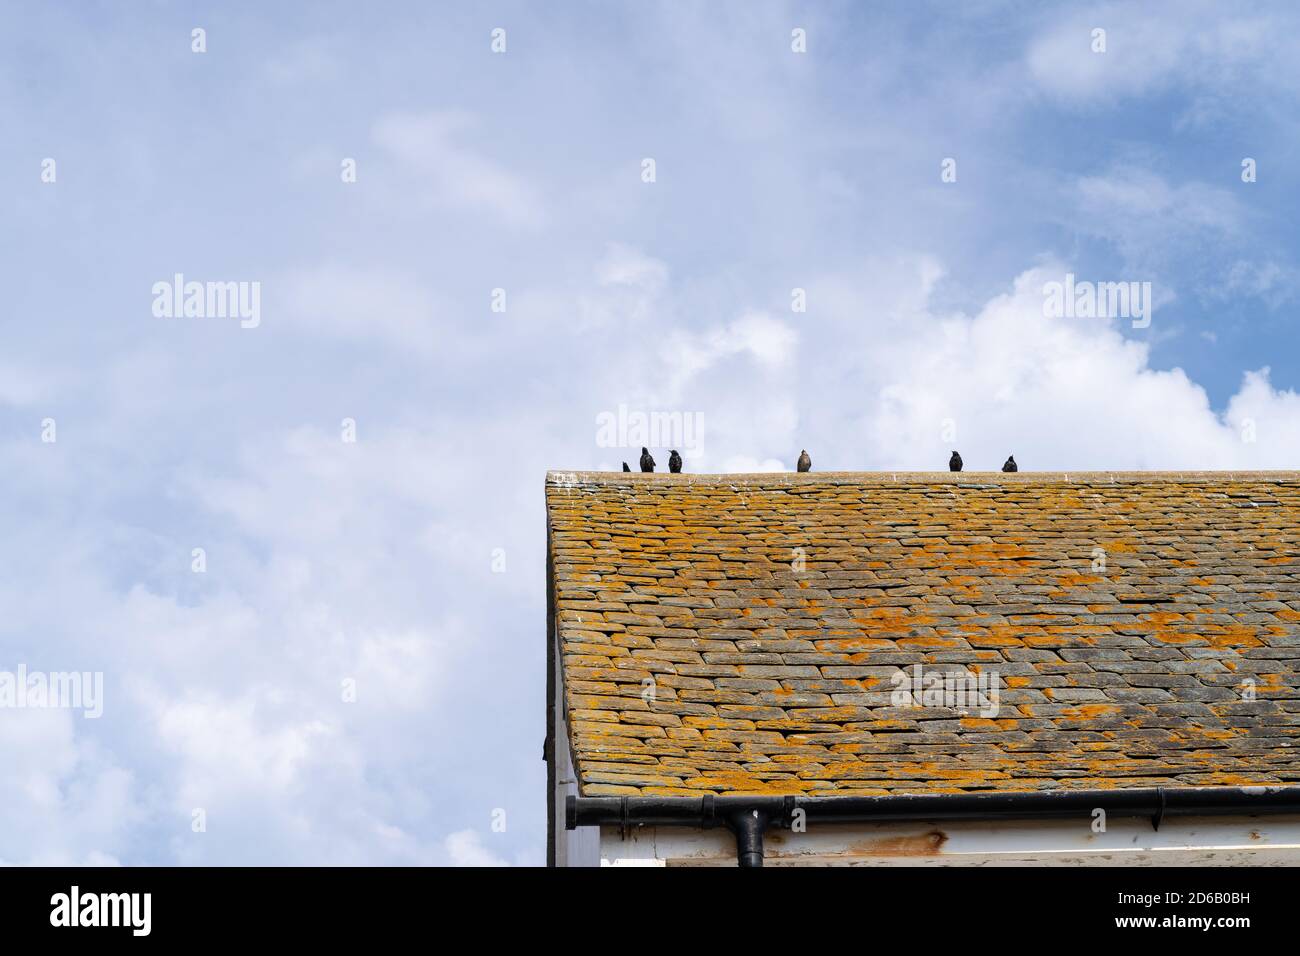 Lichen covered roof with a couple of starling on the top against a blue sky with white clouds Stock Photo